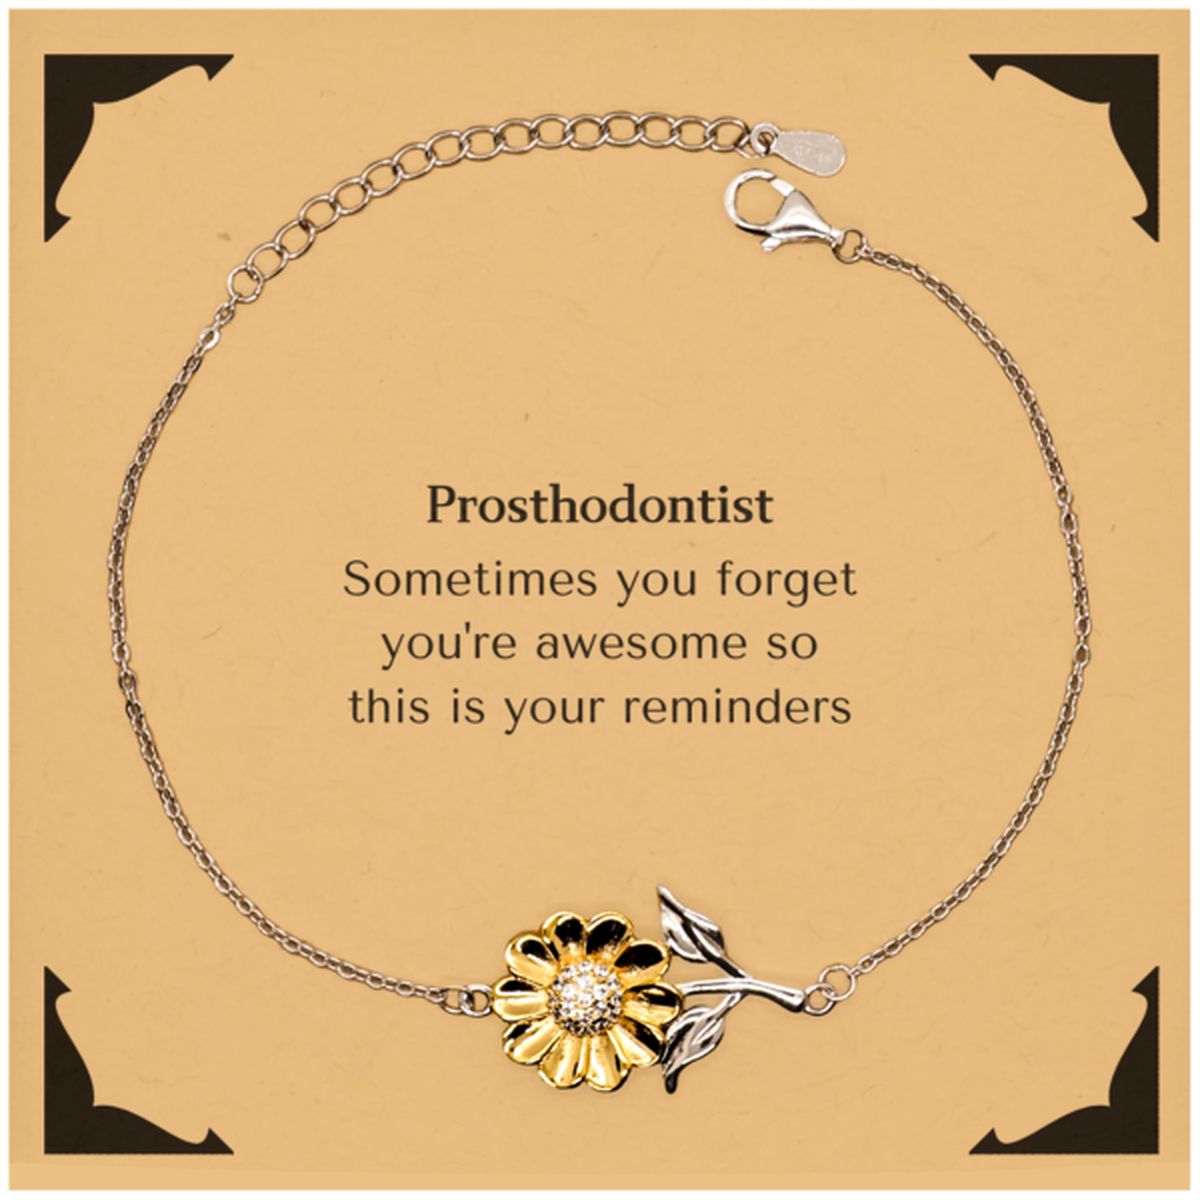 Sentimental Prosthodontist Sunflower Bracelet, Prosthodontist Sometimes you forget you're awesome so this is your reminders, Graduation Christmas Birthday Gifts for Prosthodontist, Men, Women, Coworkers